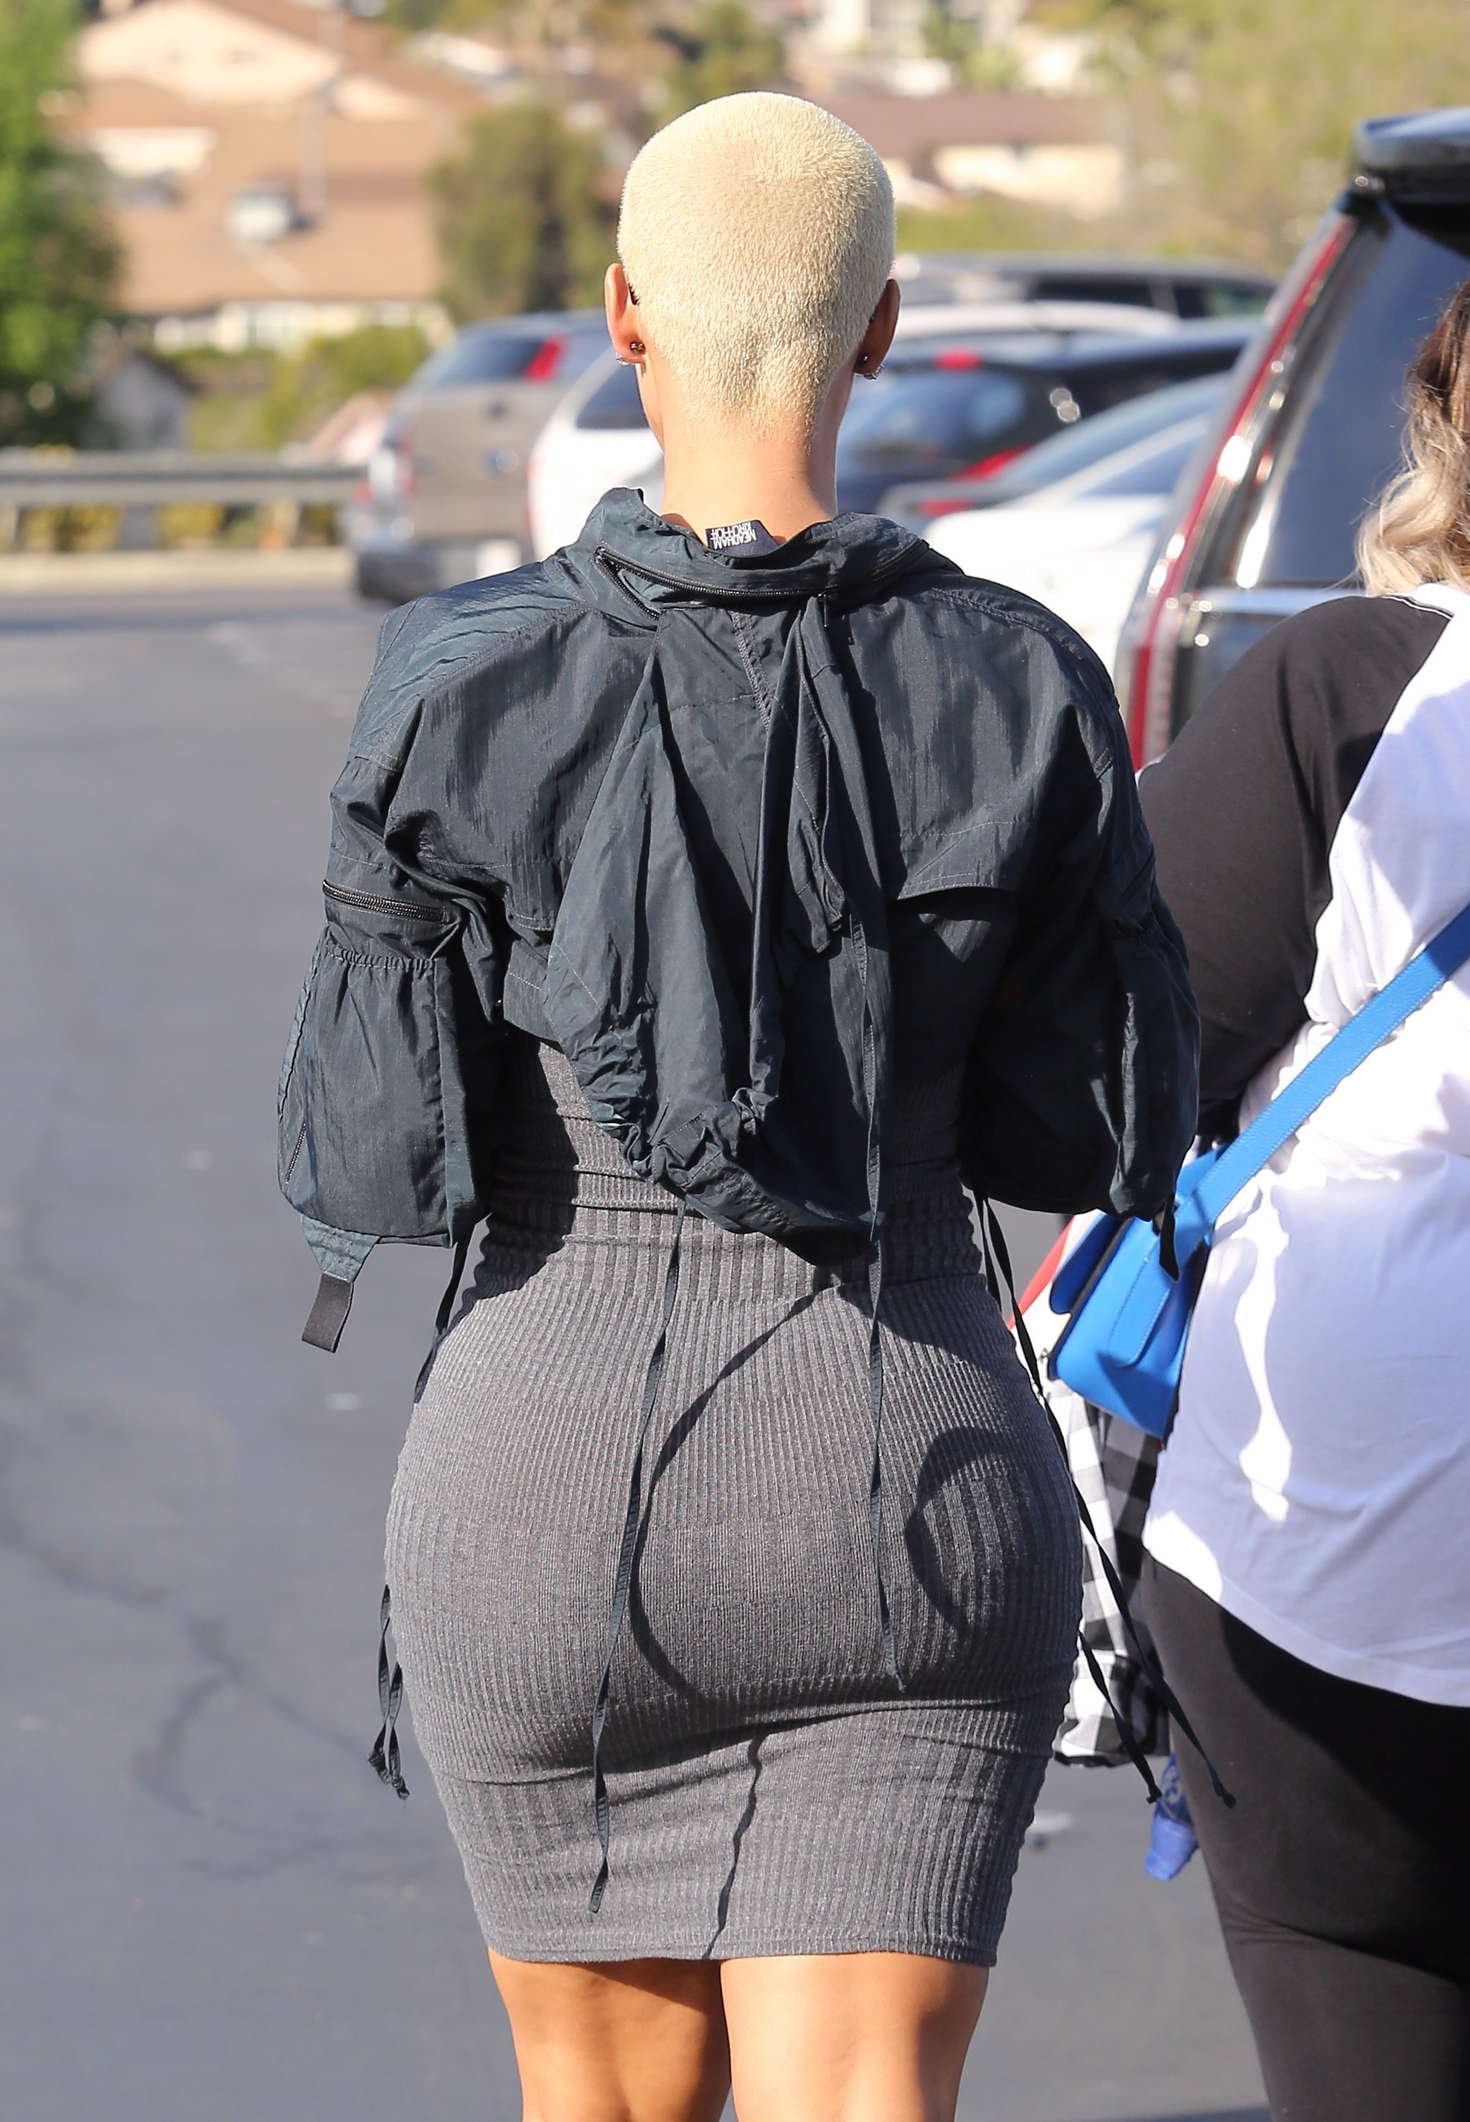 Amber Rose Booty In Tights